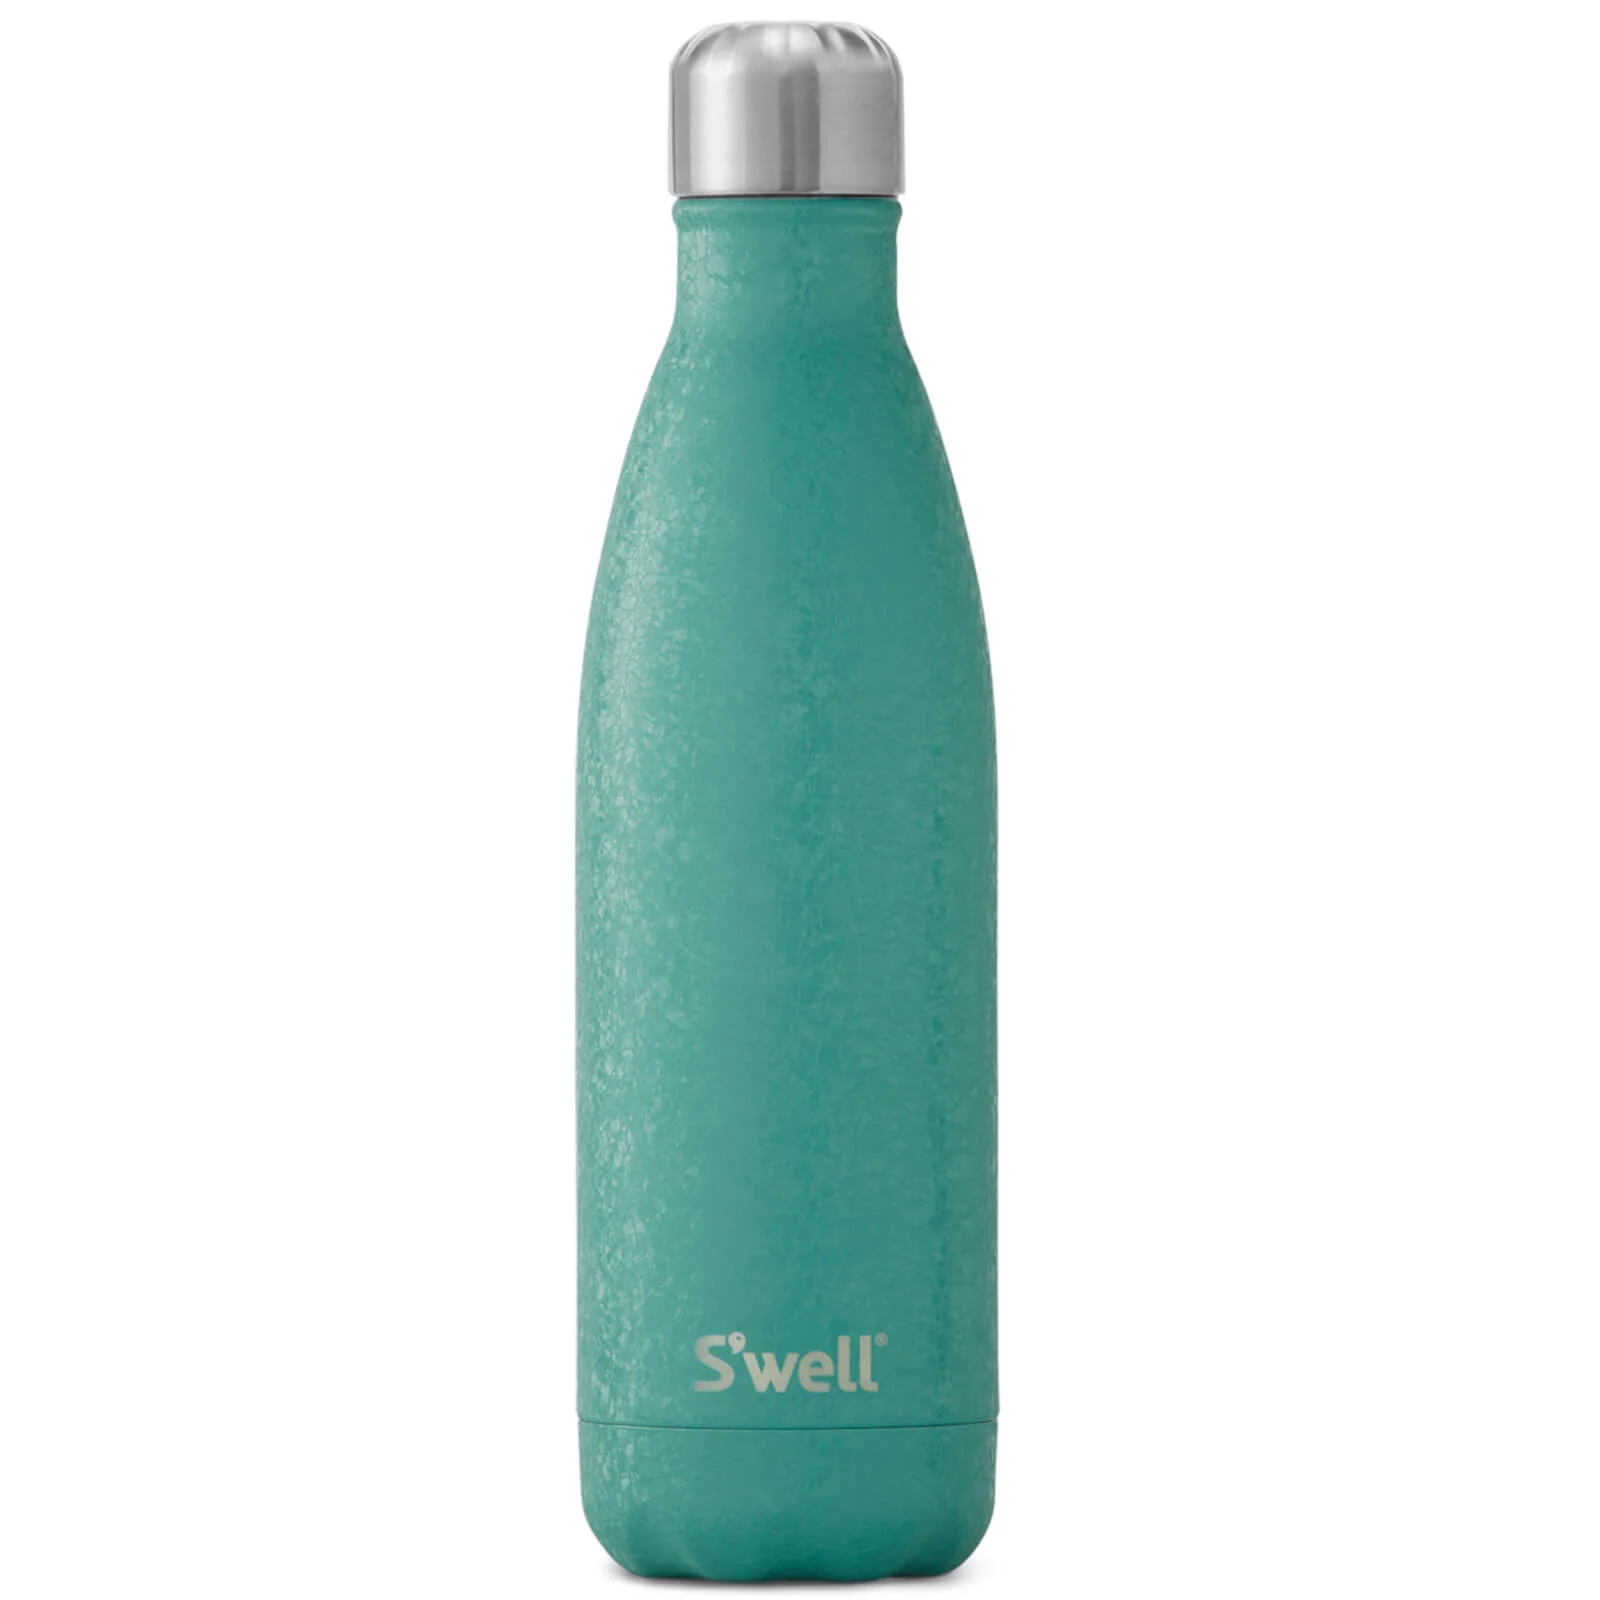 S'well Carbon Montana Blue Water Bottle - 500ml Image 1